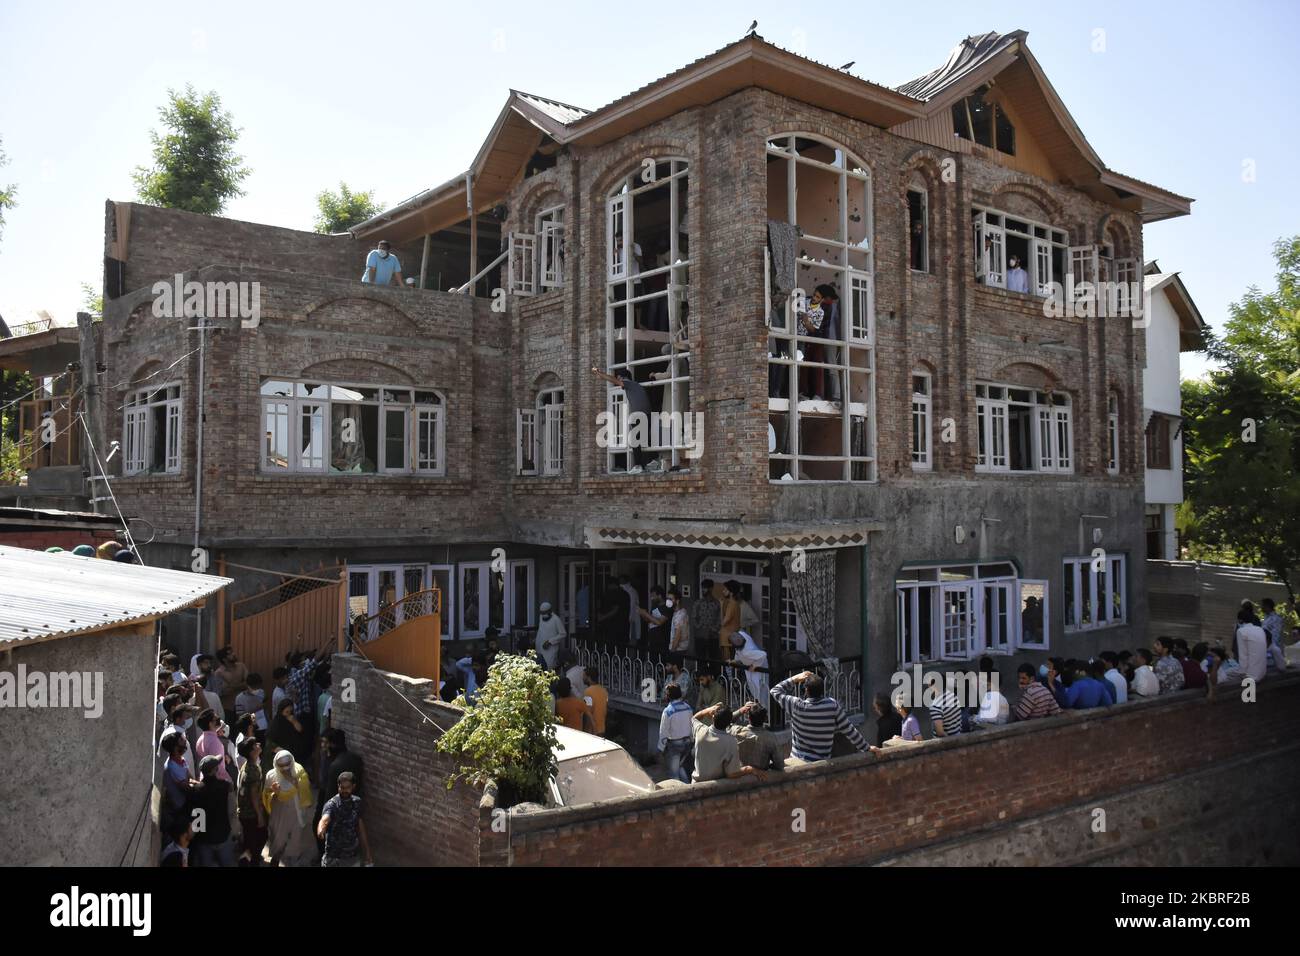 People arrive at the damage house where three rebels were killed in an encounter with Indian forces in Srinagar, Indian Admnistered Kashmir on 21 June 2020. (Photo by Muzamil Mattoo/NurPhoto) Stock Photo